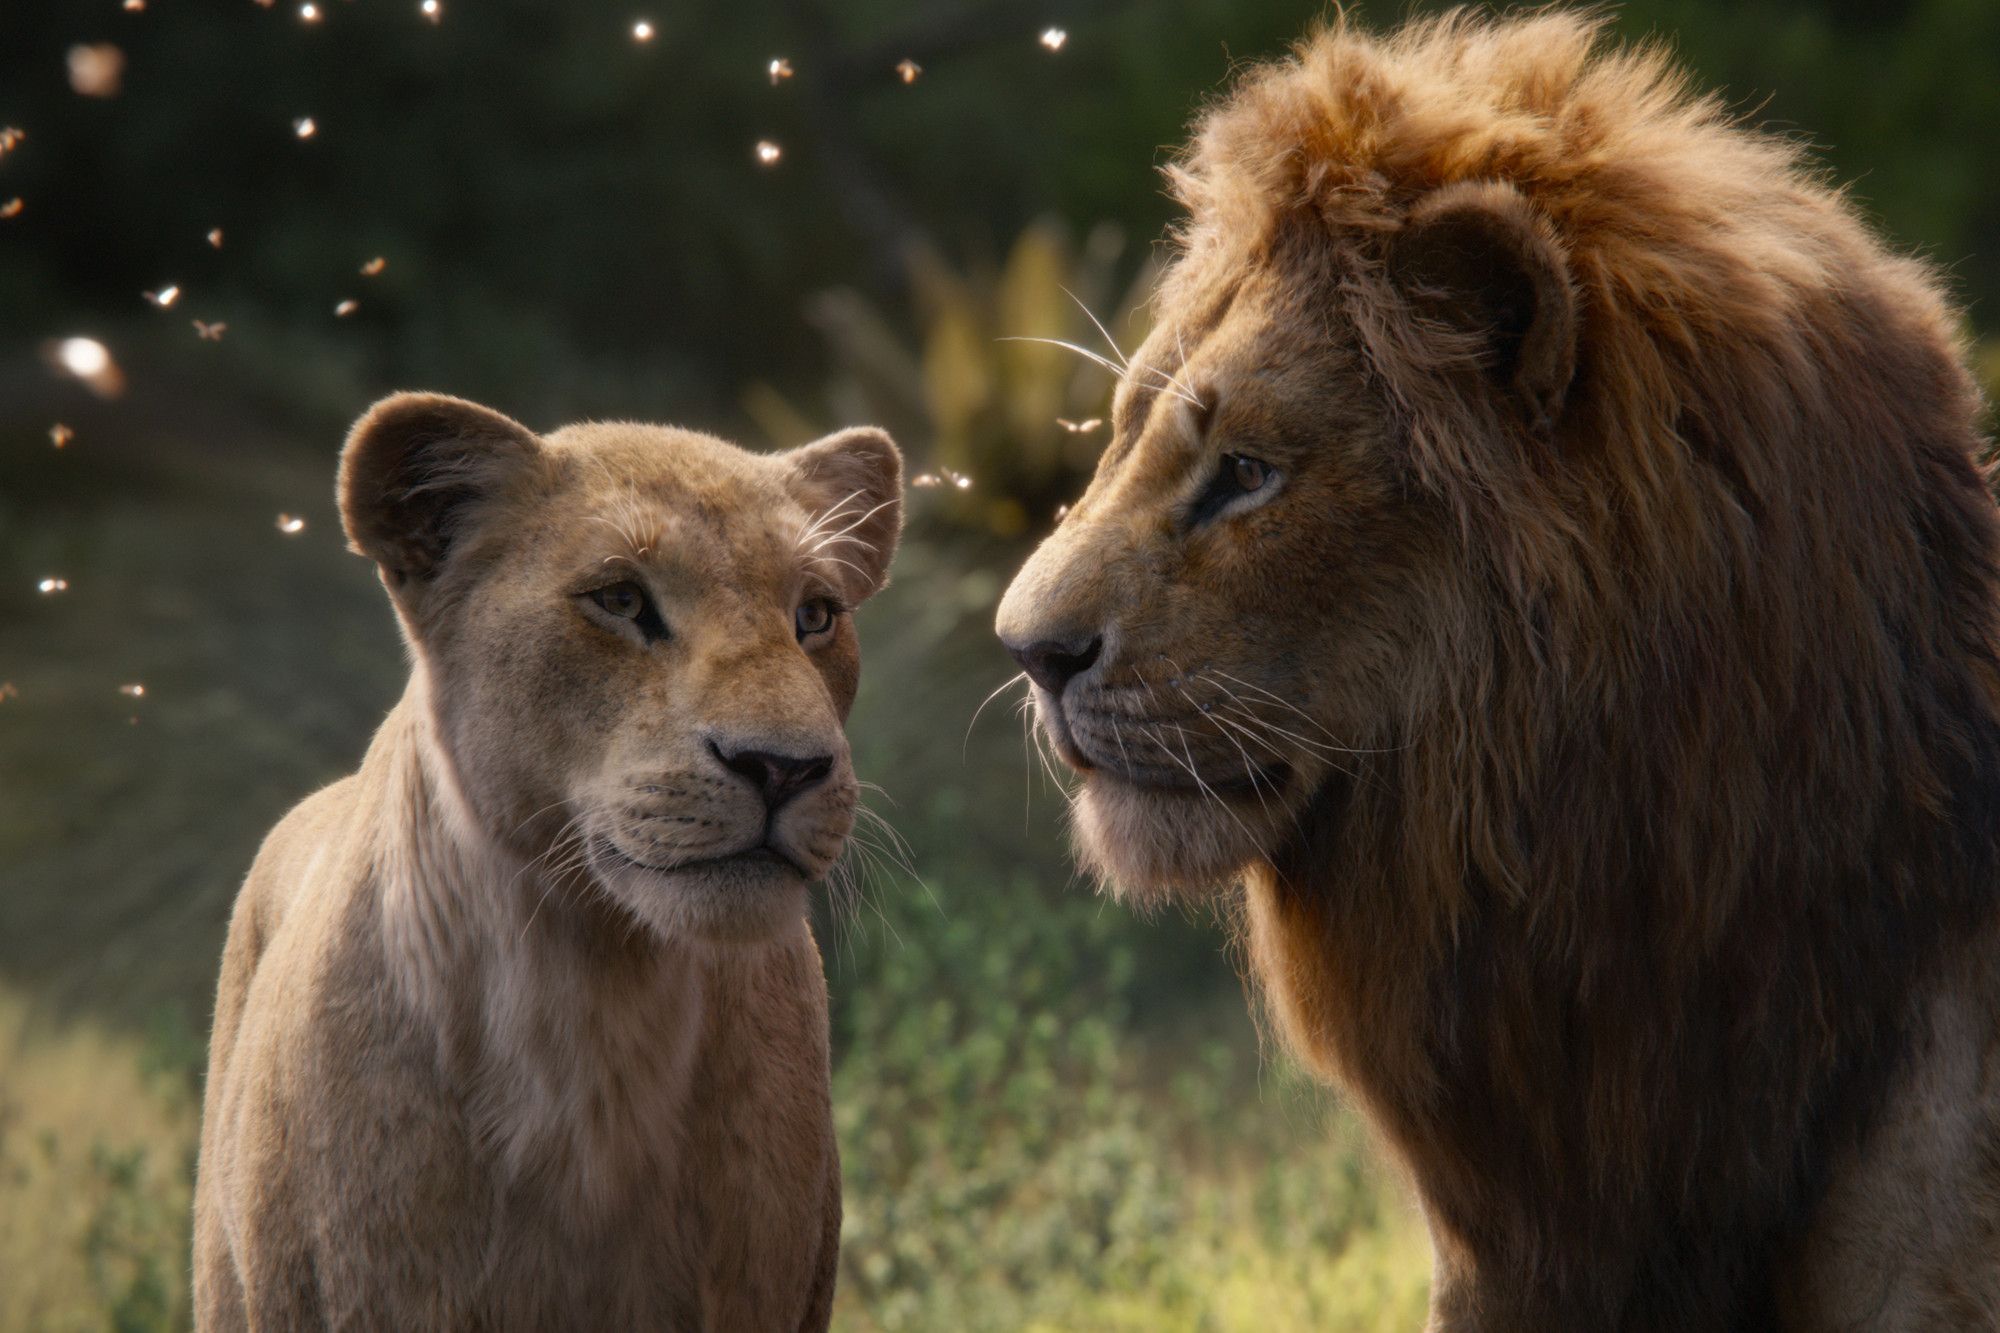 The Lion King' is a lie that erases female pride: scientist